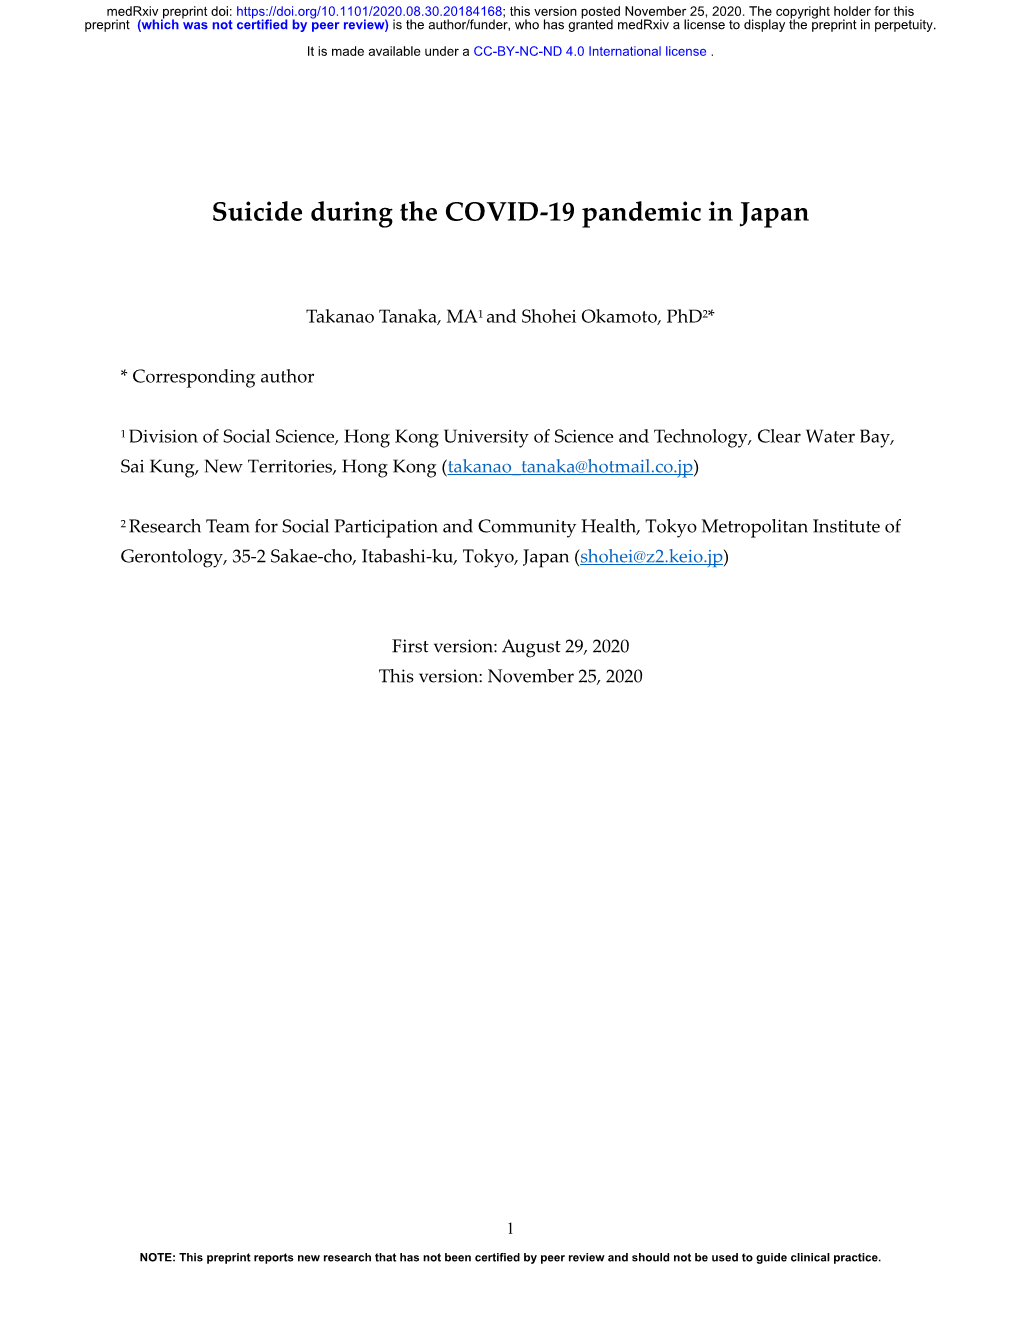 Suicide During the COVID-19 Pandemic in Japan